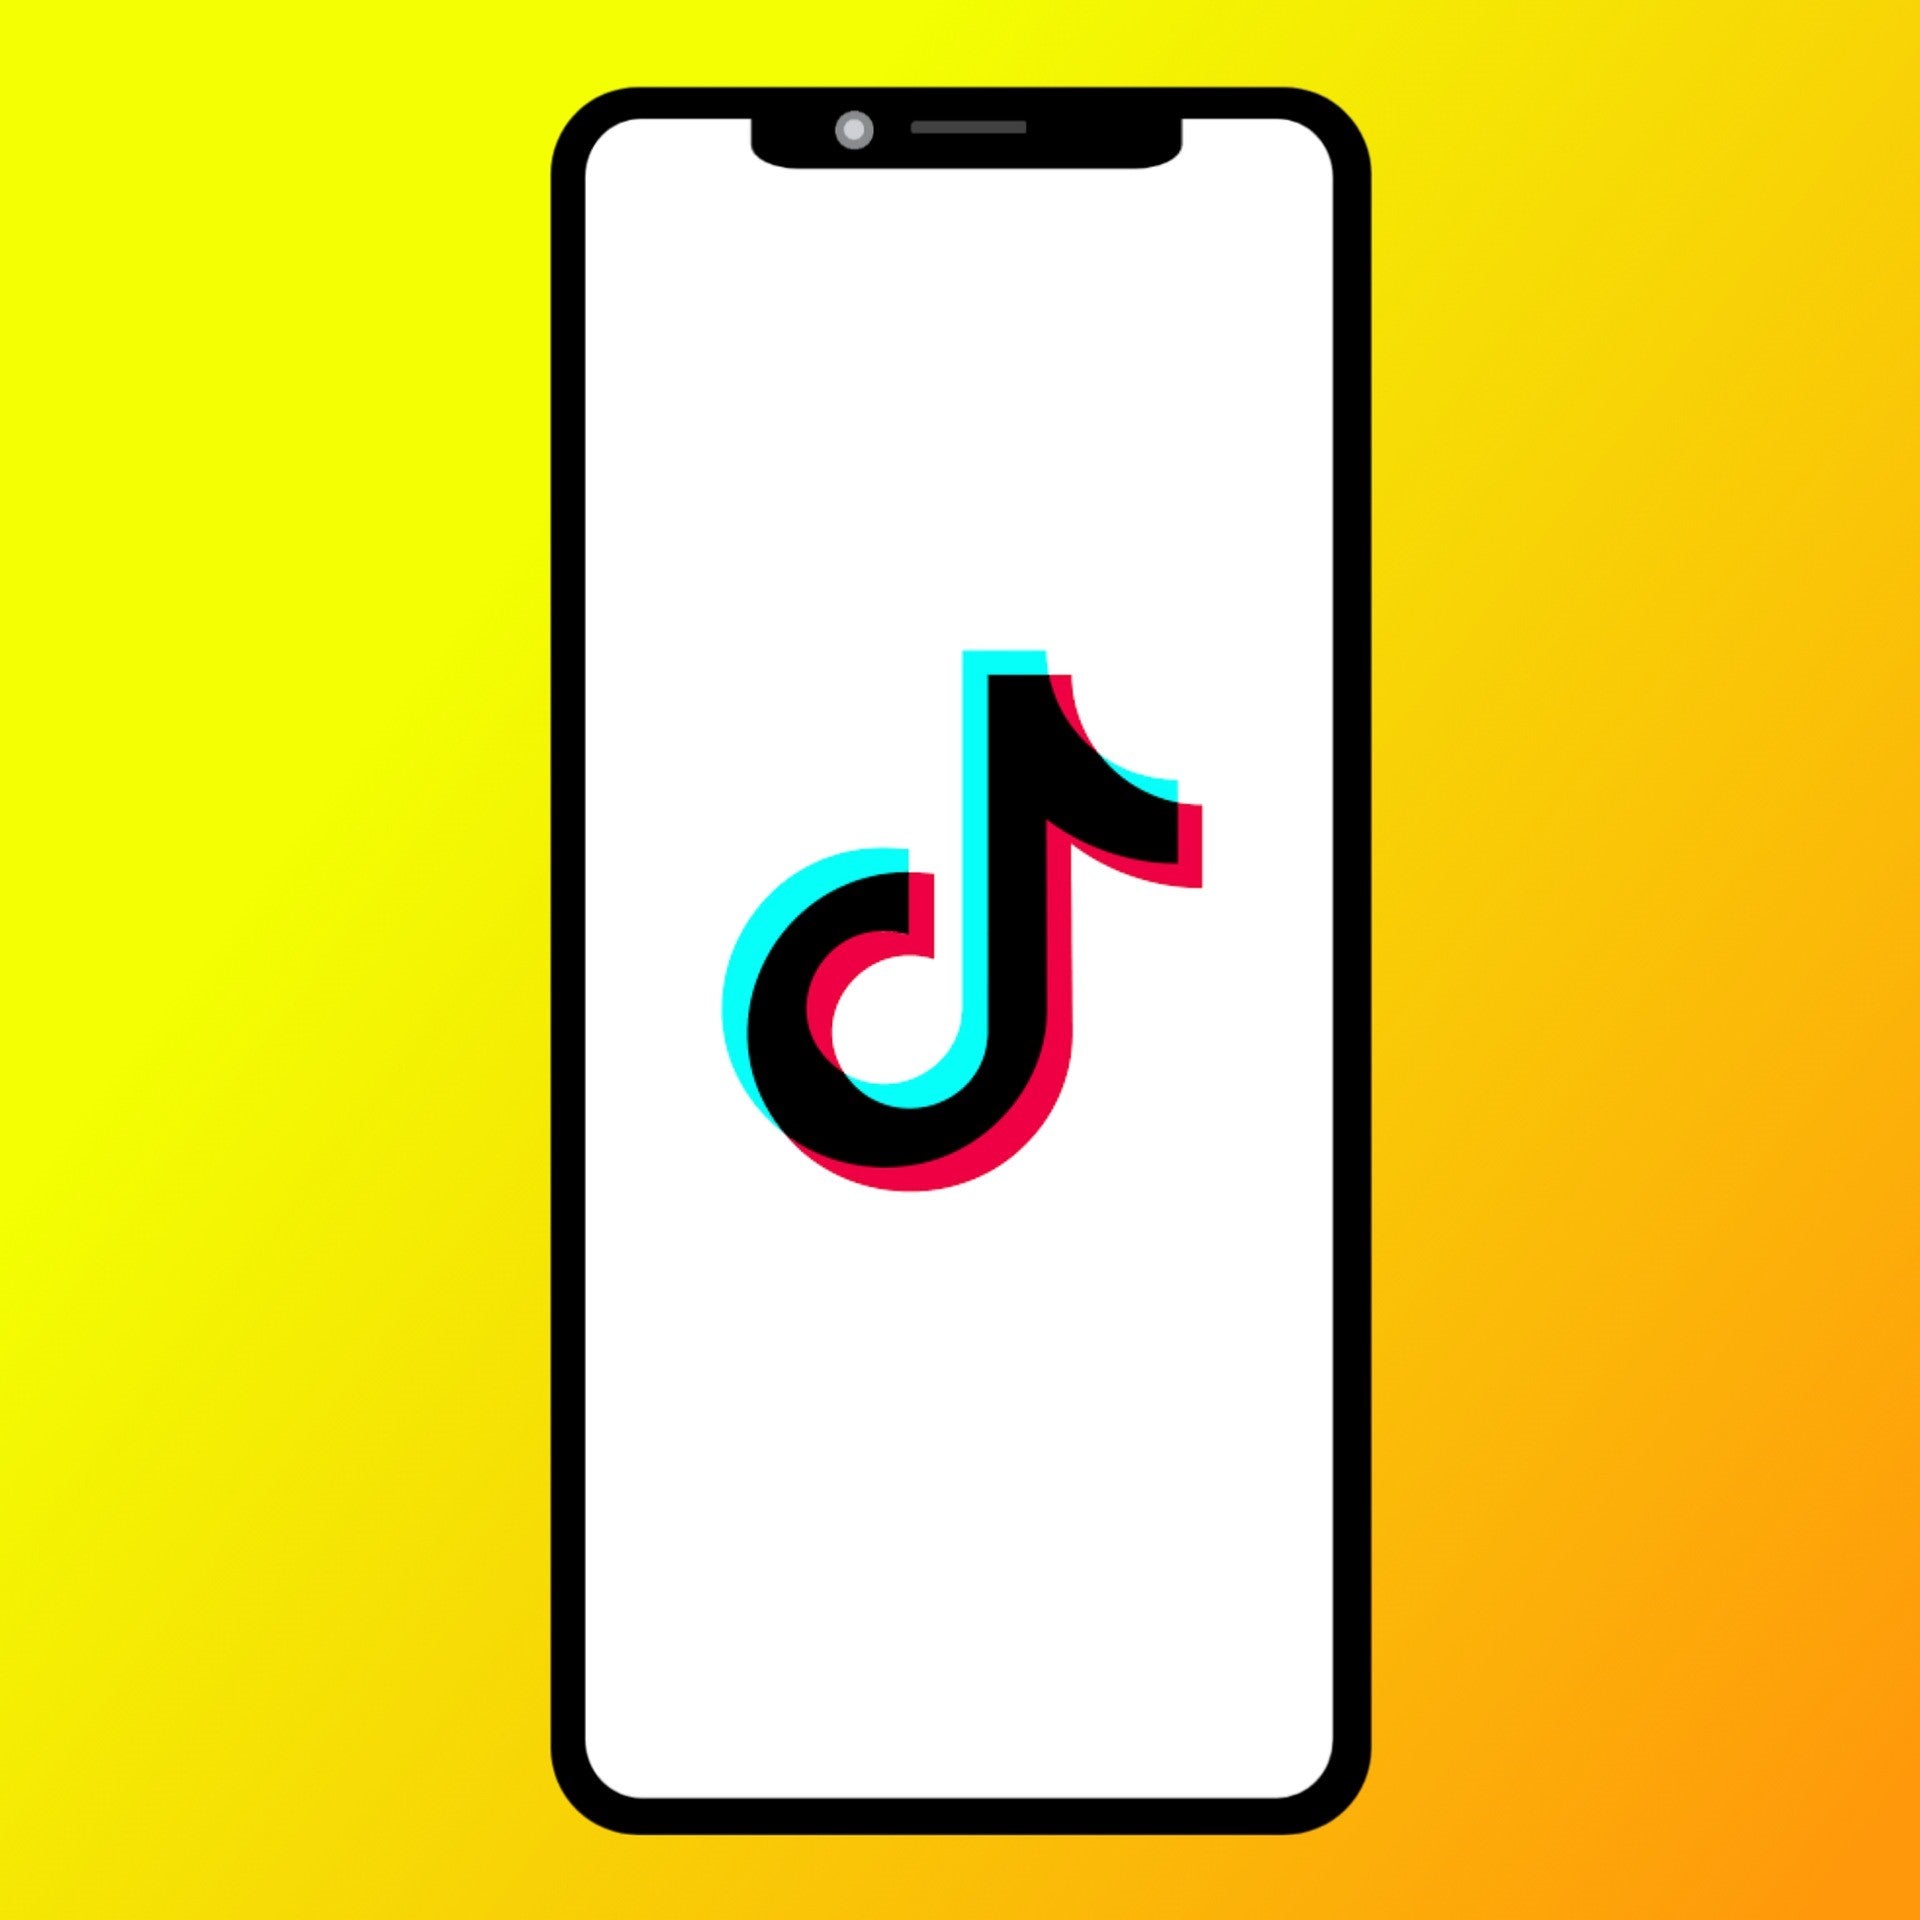 How to get a lot of followers on Tik Tok?